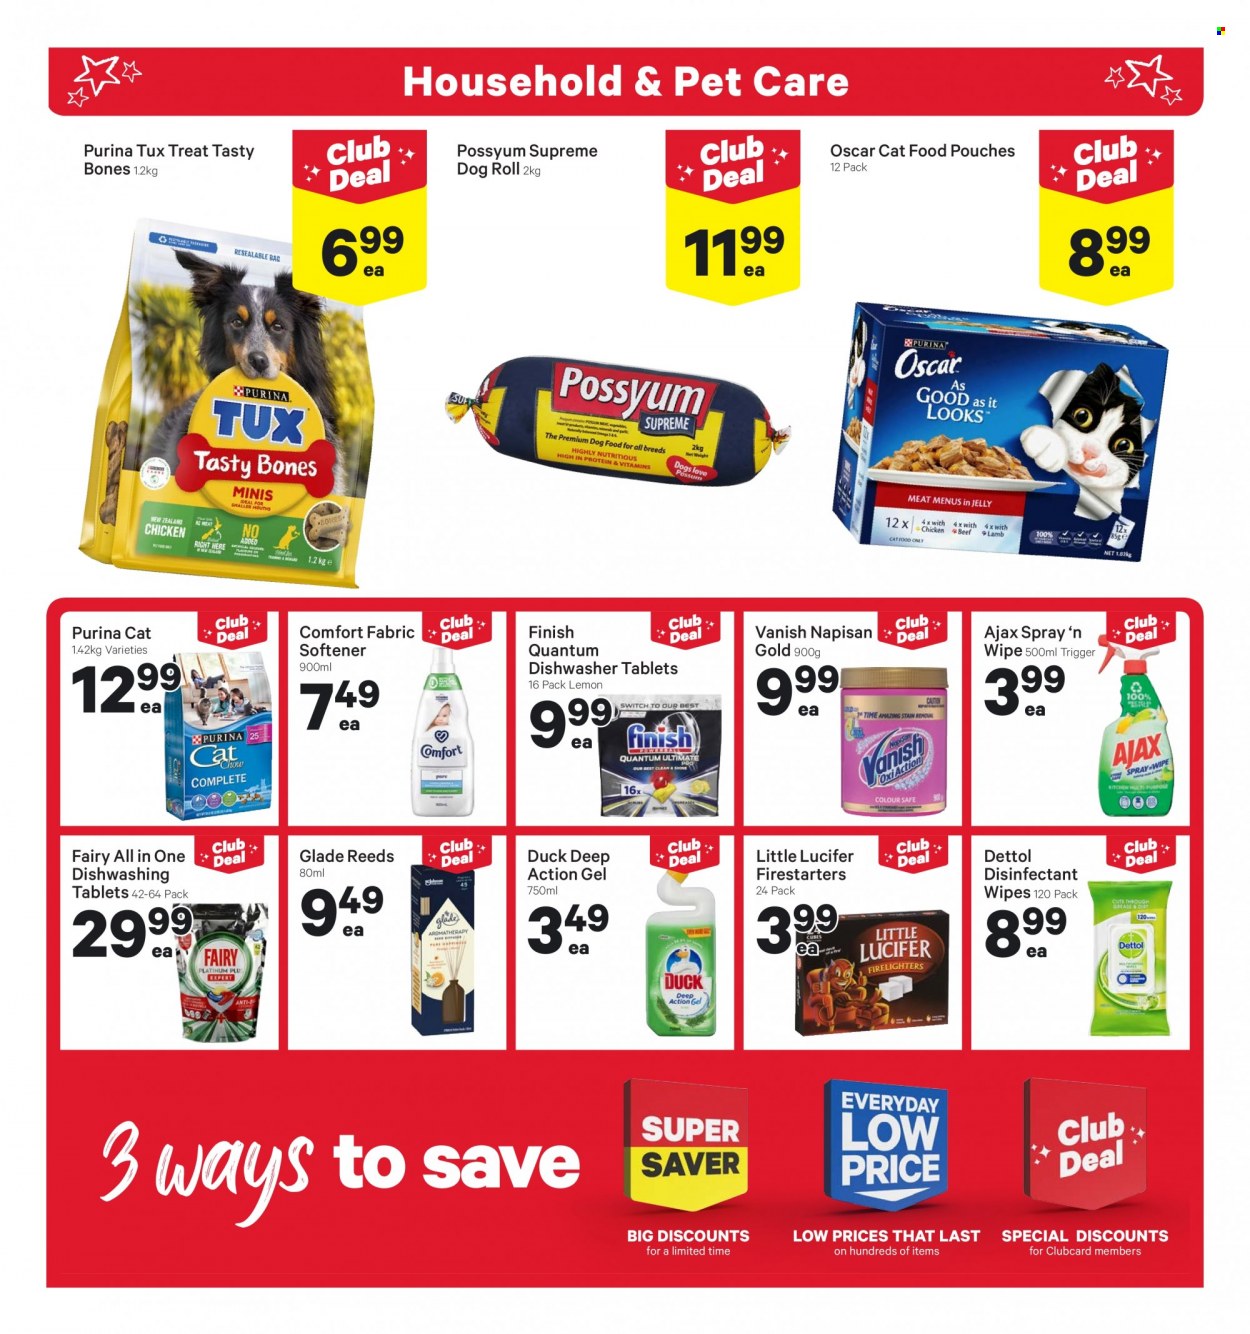 thumbnail - New World mailer - 28.11.2022 - 04.12.2022 - Sales products - pie, Dove, switch, wipes, Dettol, desinfection, Fairy, Vanish, Ajax, fabric softener, Comfort softener, dishwasher cleaner, Finish Powerball, Finish Quantum Ultimate, dishwasher tablets, bag, firelighter, Glade, animal food, cat food, dog food, Purina. Page 23.